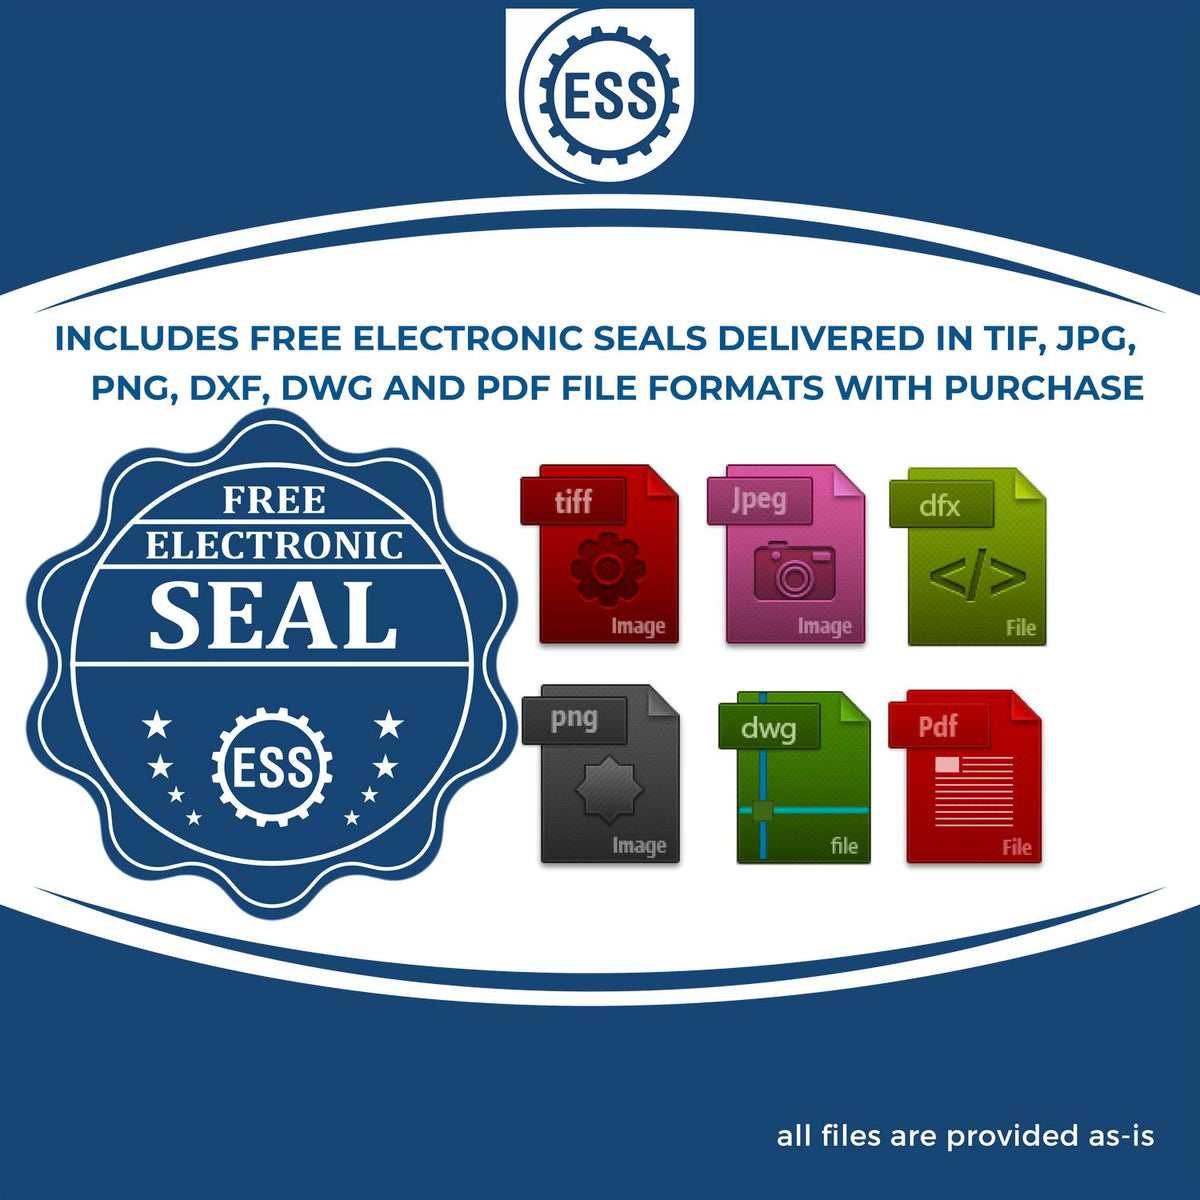 An infographic for the free electronic seal for the Soft New Mexico Professional Engineer Seal illustrating the different file type icons such as DXF, DWG, TIF, JPG and PNG.